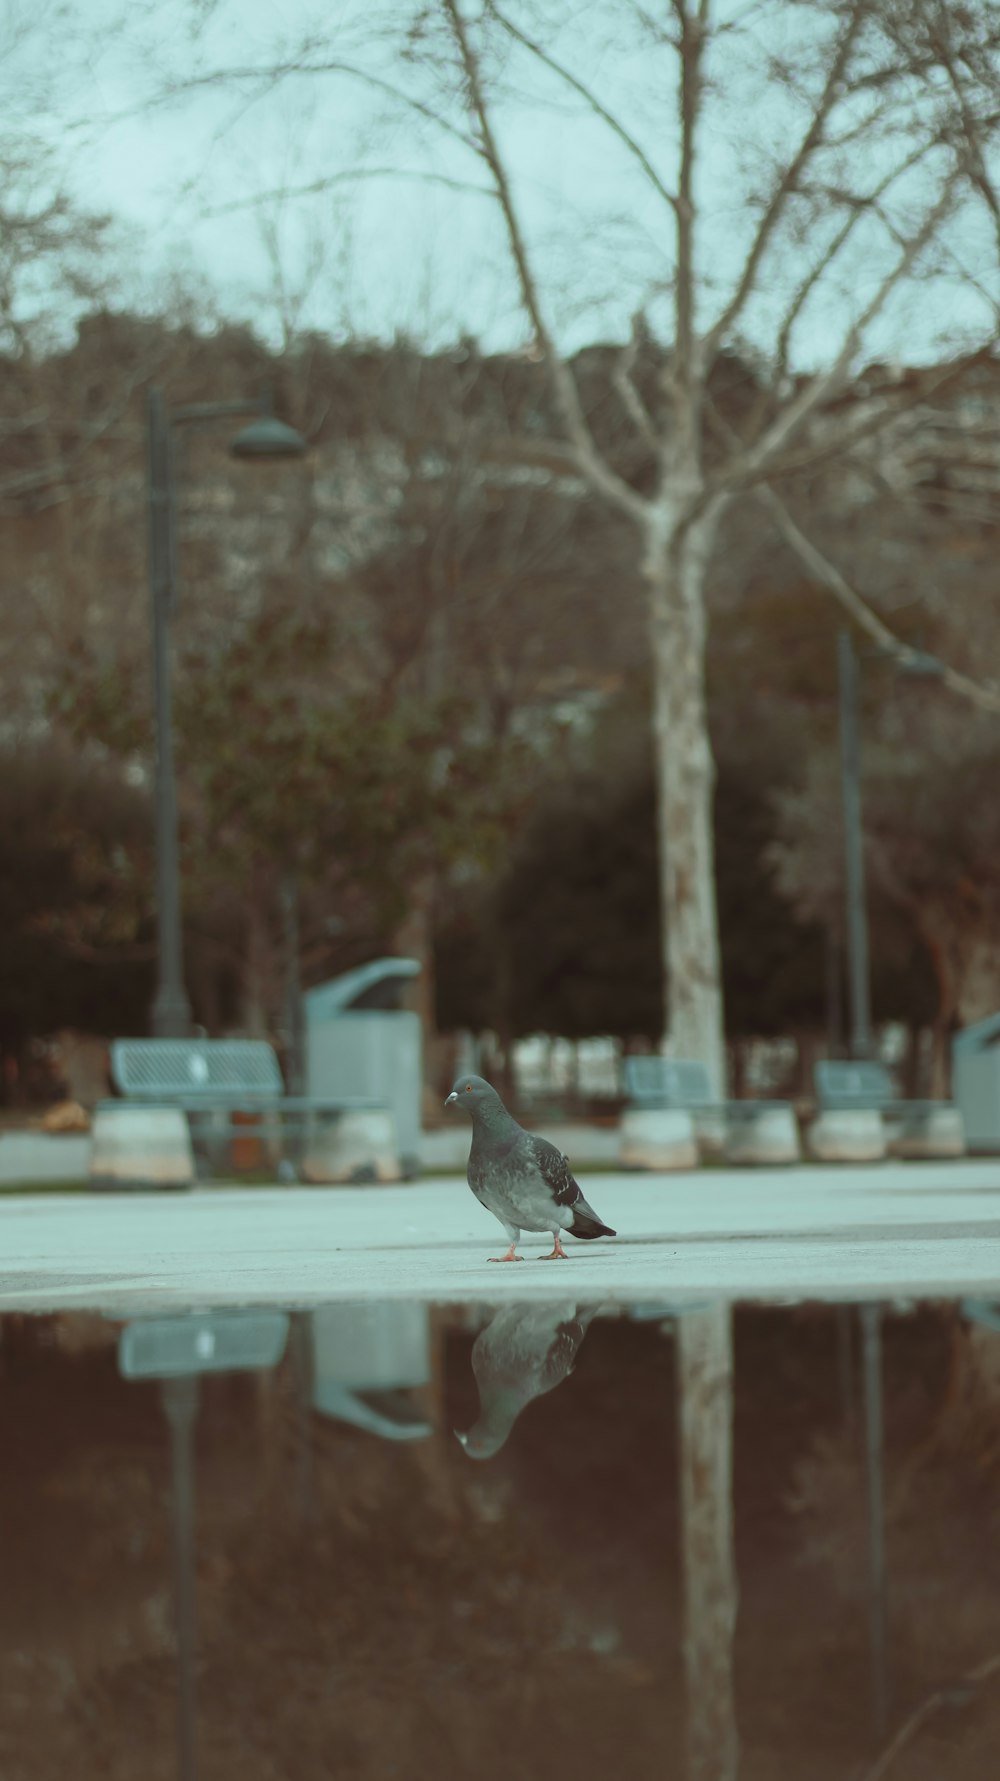 a bird is sitting on the edge of a pool